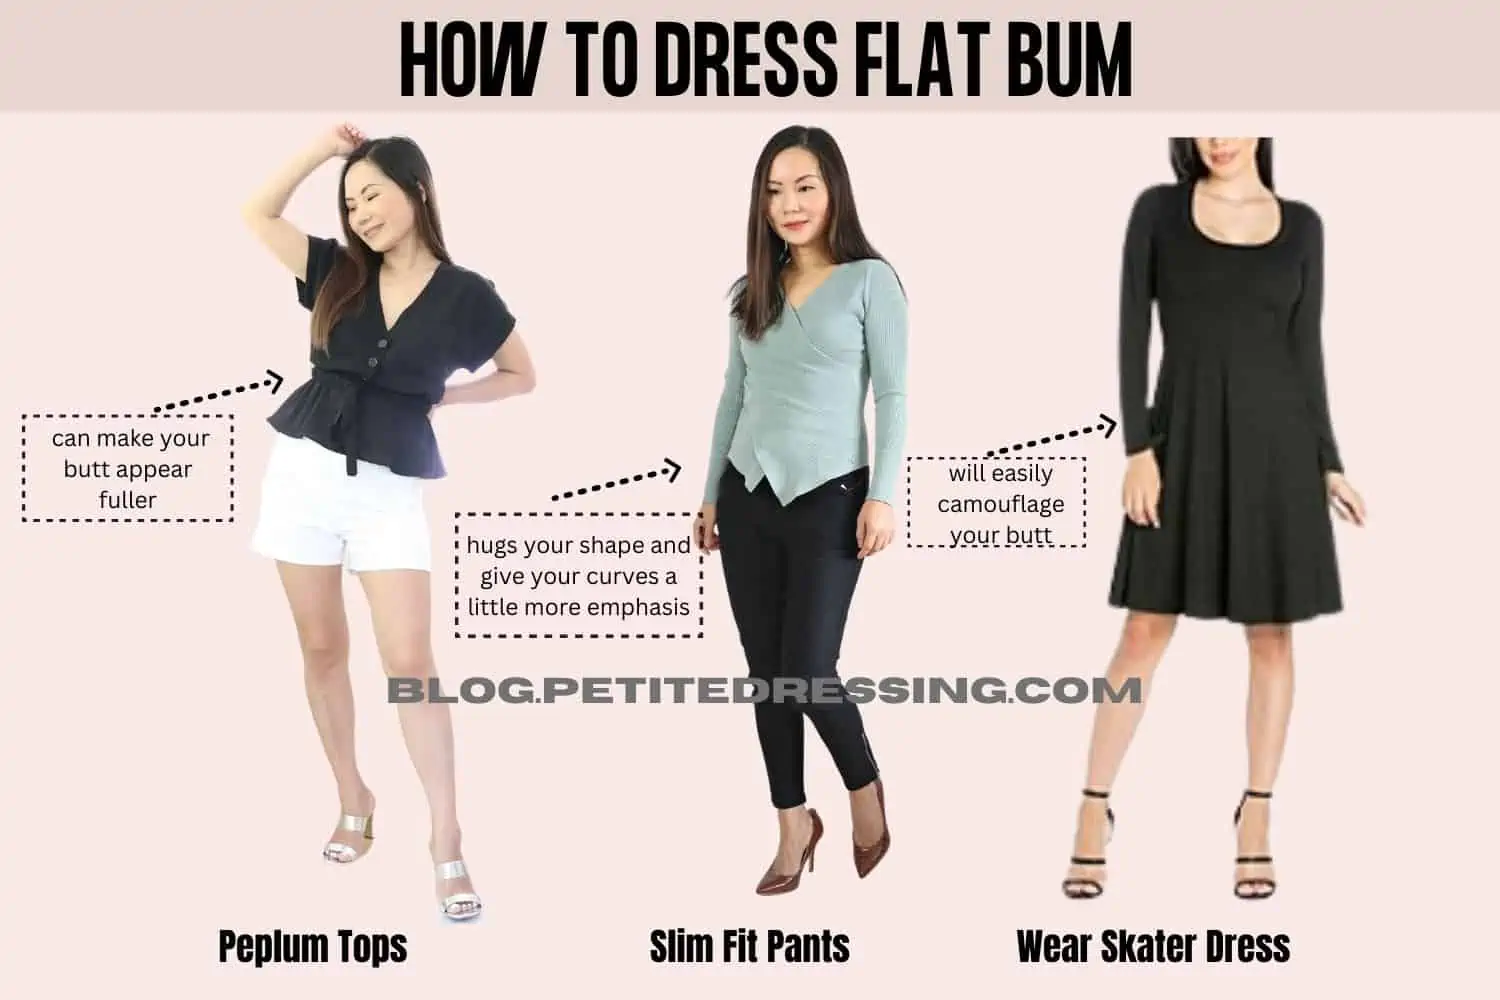 The Complete Styling Guide if you have a Flat Bum - Petite Dressing